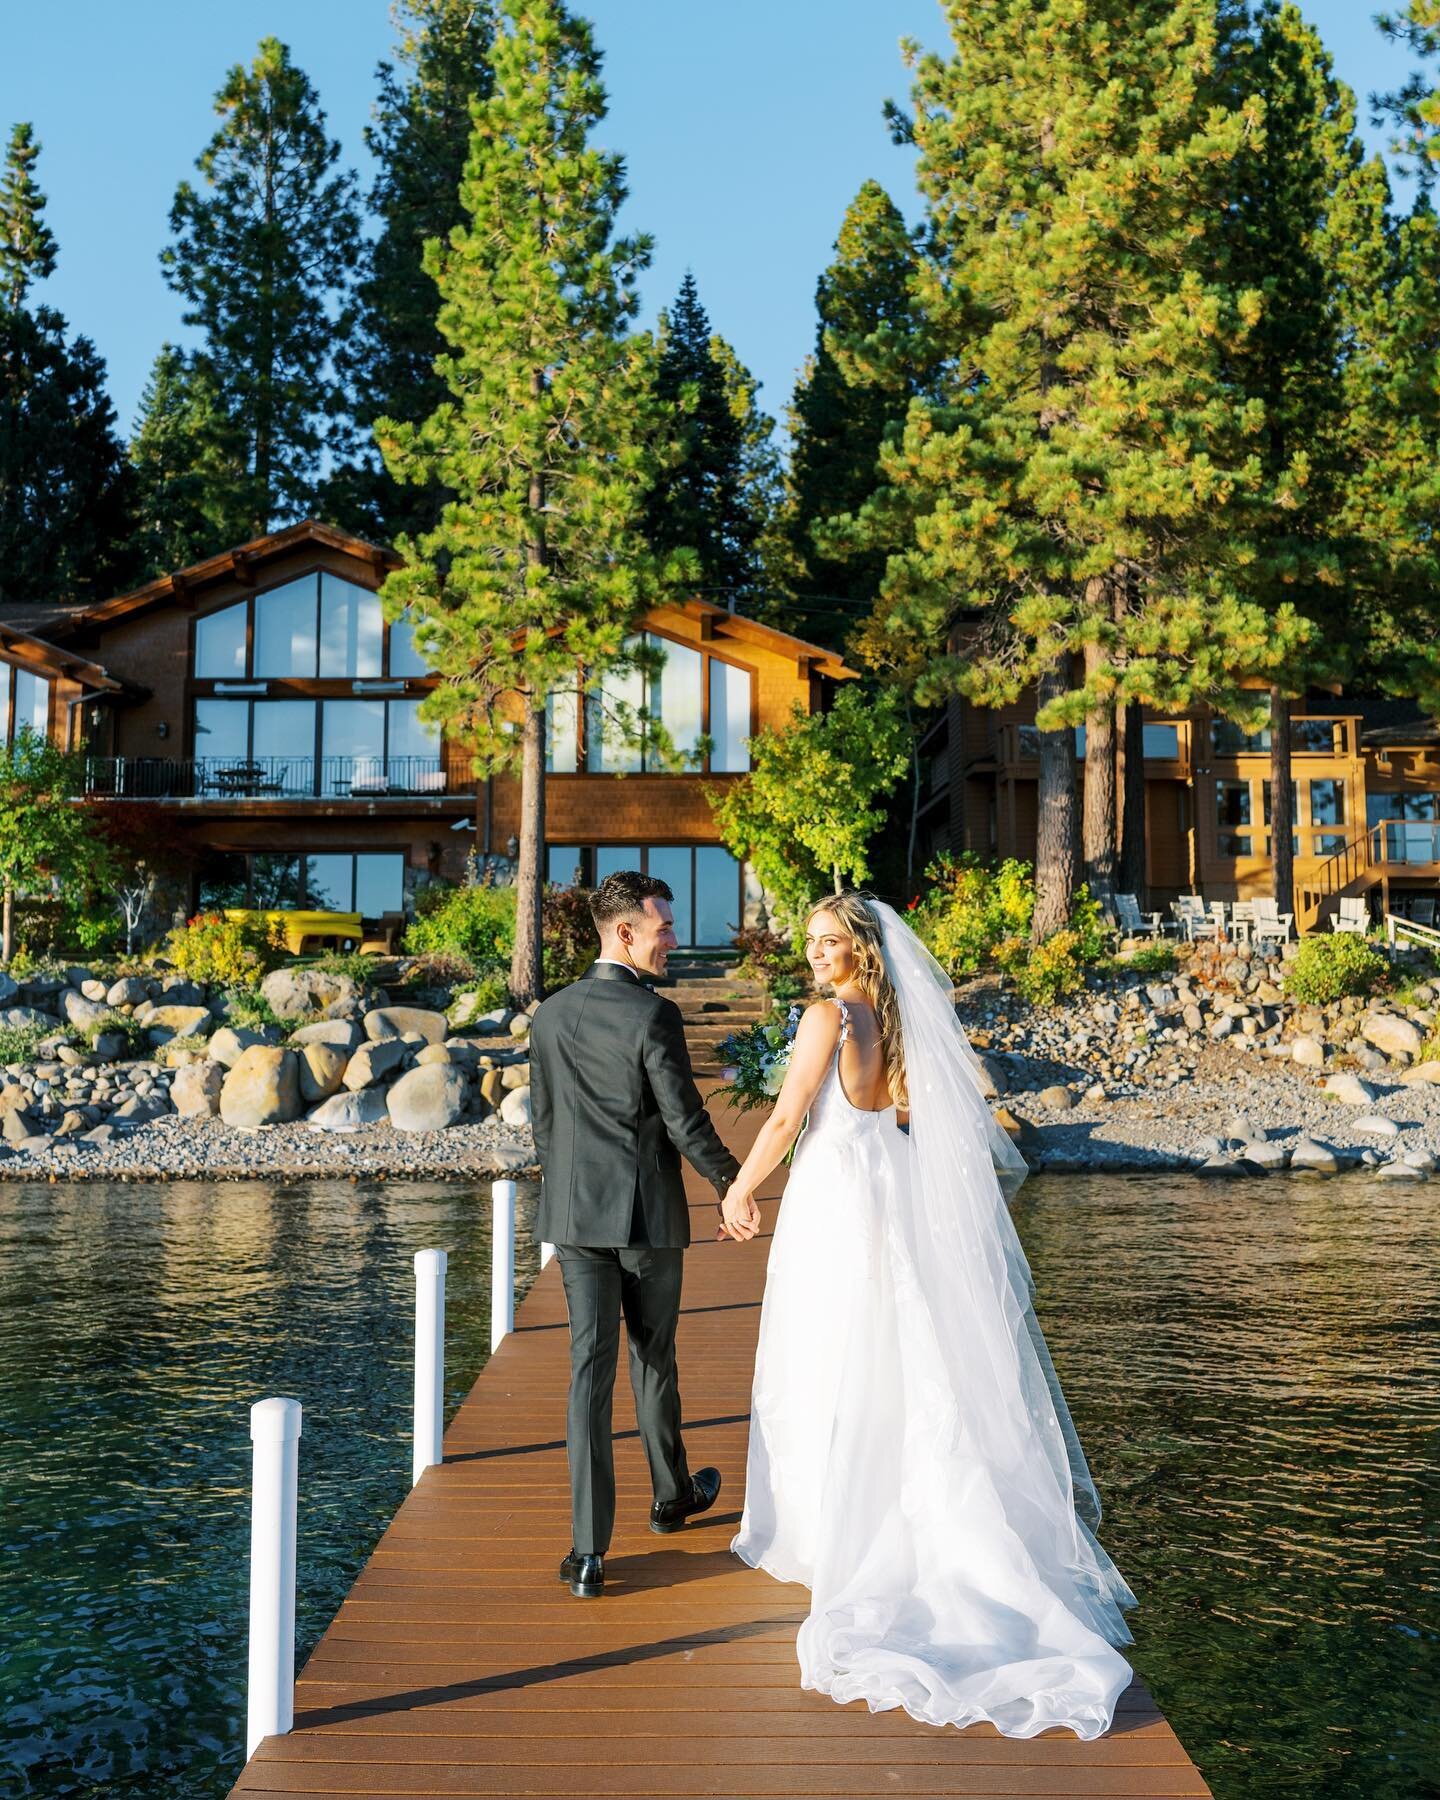 Take me back to this dreamy wedding in Tahoe 😍